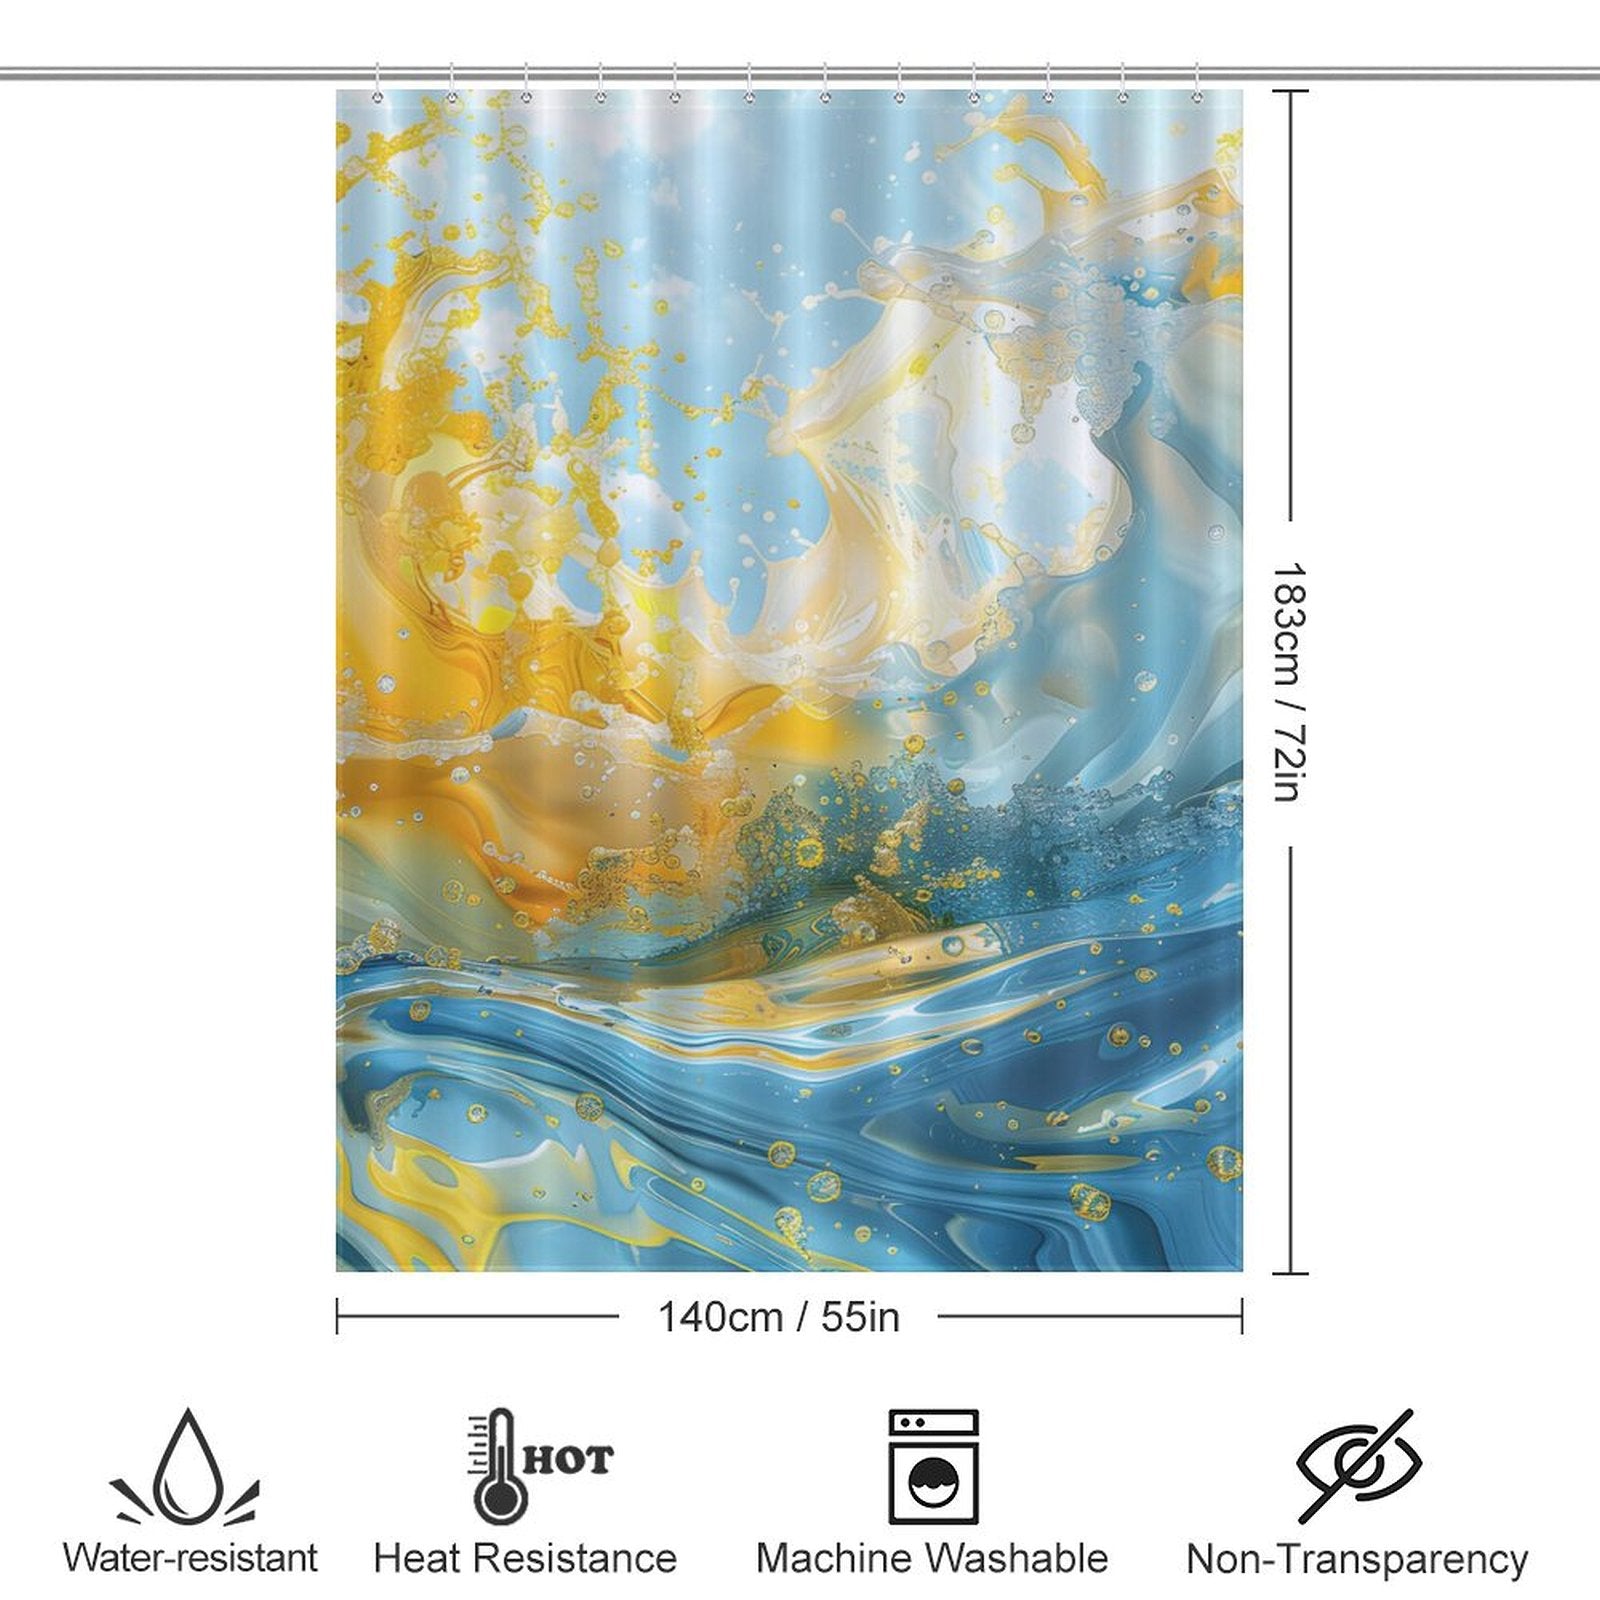 An Abstract Yellow and Blue Wave Ocean Watercolor Shower Curtain-Cottoncat featuring an abstract blue and yellow design is shown. The dimensions are 183 cm by 140 cm. Icons indicate it is water-resistant, heat-resistant, machine washable, and non-transparent—perfect for enhancing your bathroom decor.